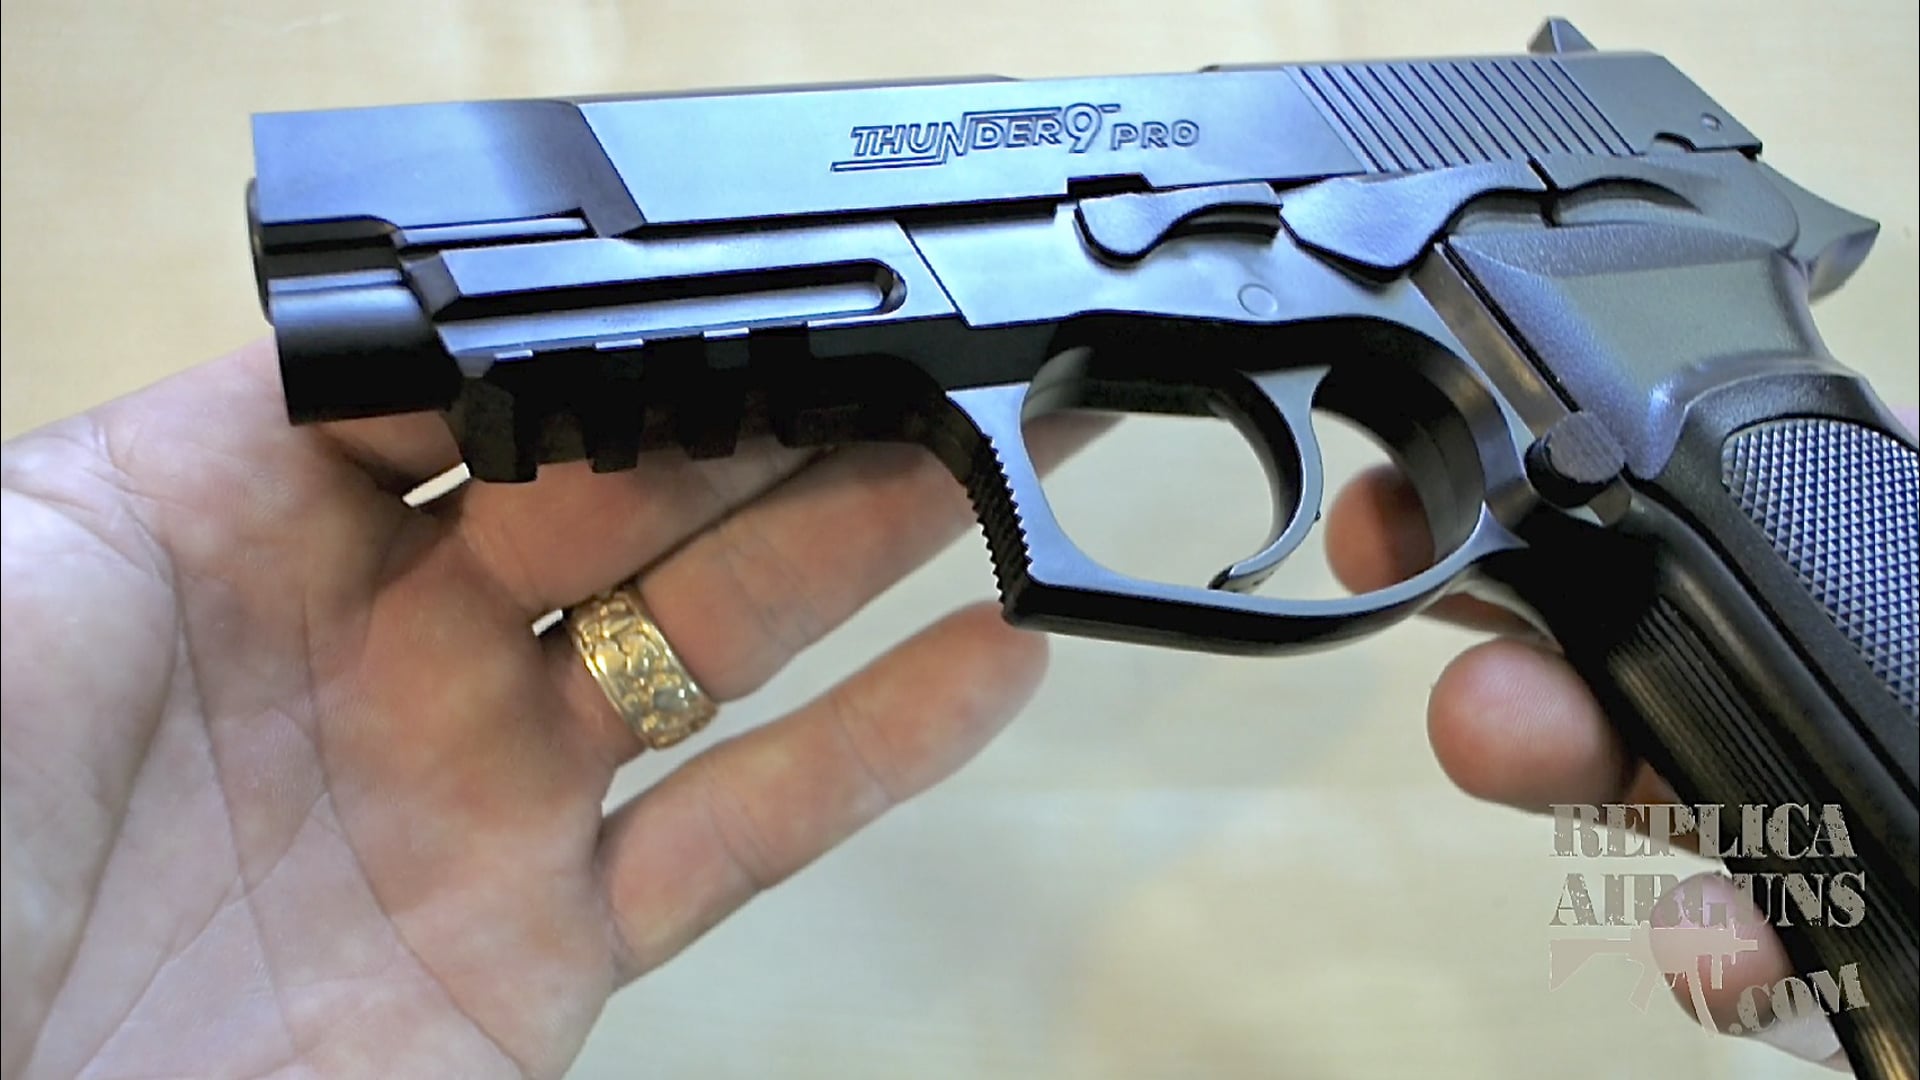 ASG Bersa Thunder 9 Pro CO2 BB Pistol Table Top Review